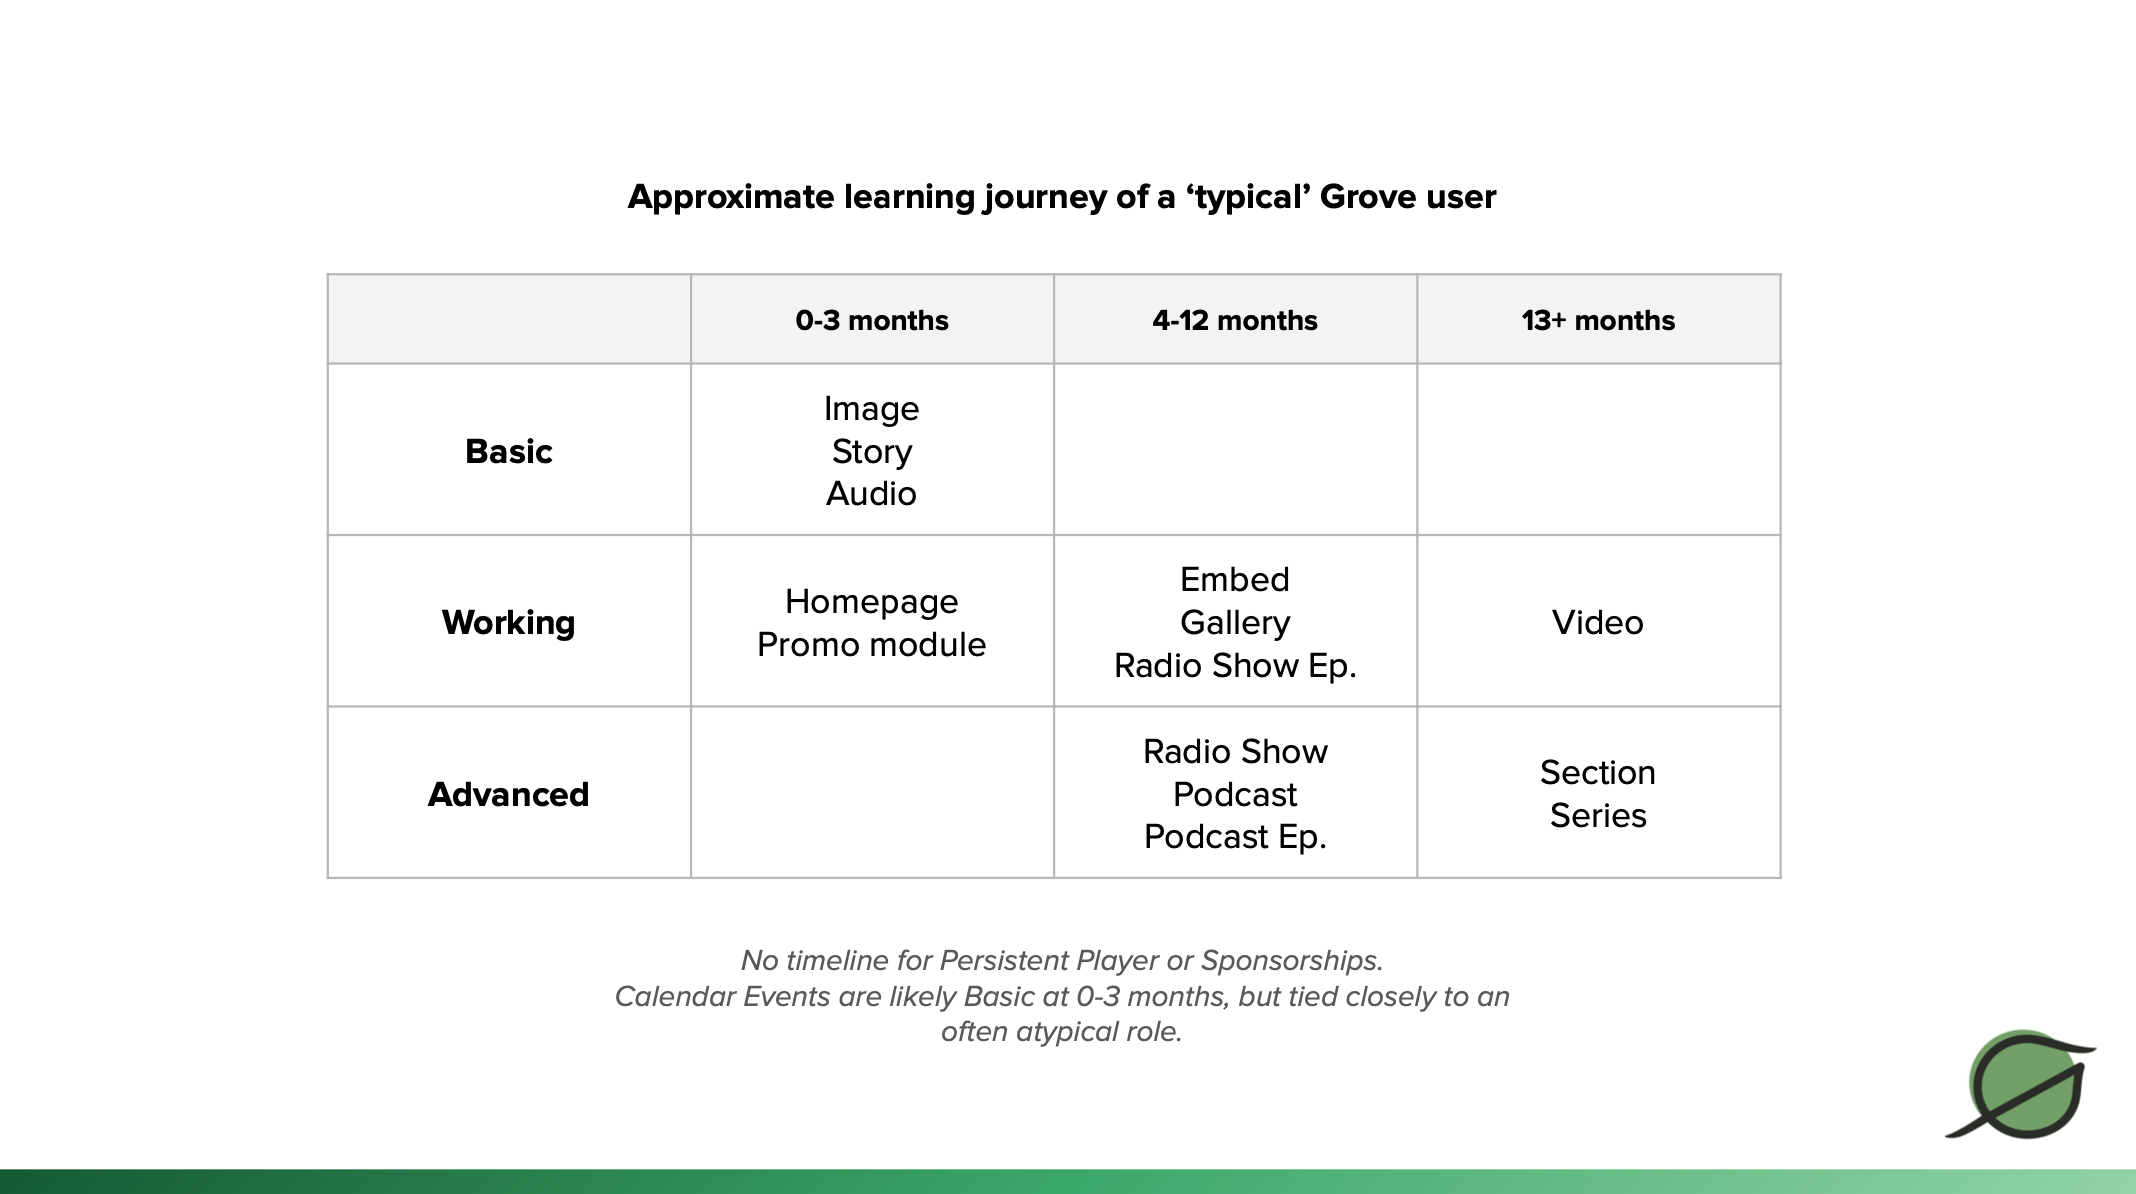 This framework shows the learning progress a Grove users makes over time